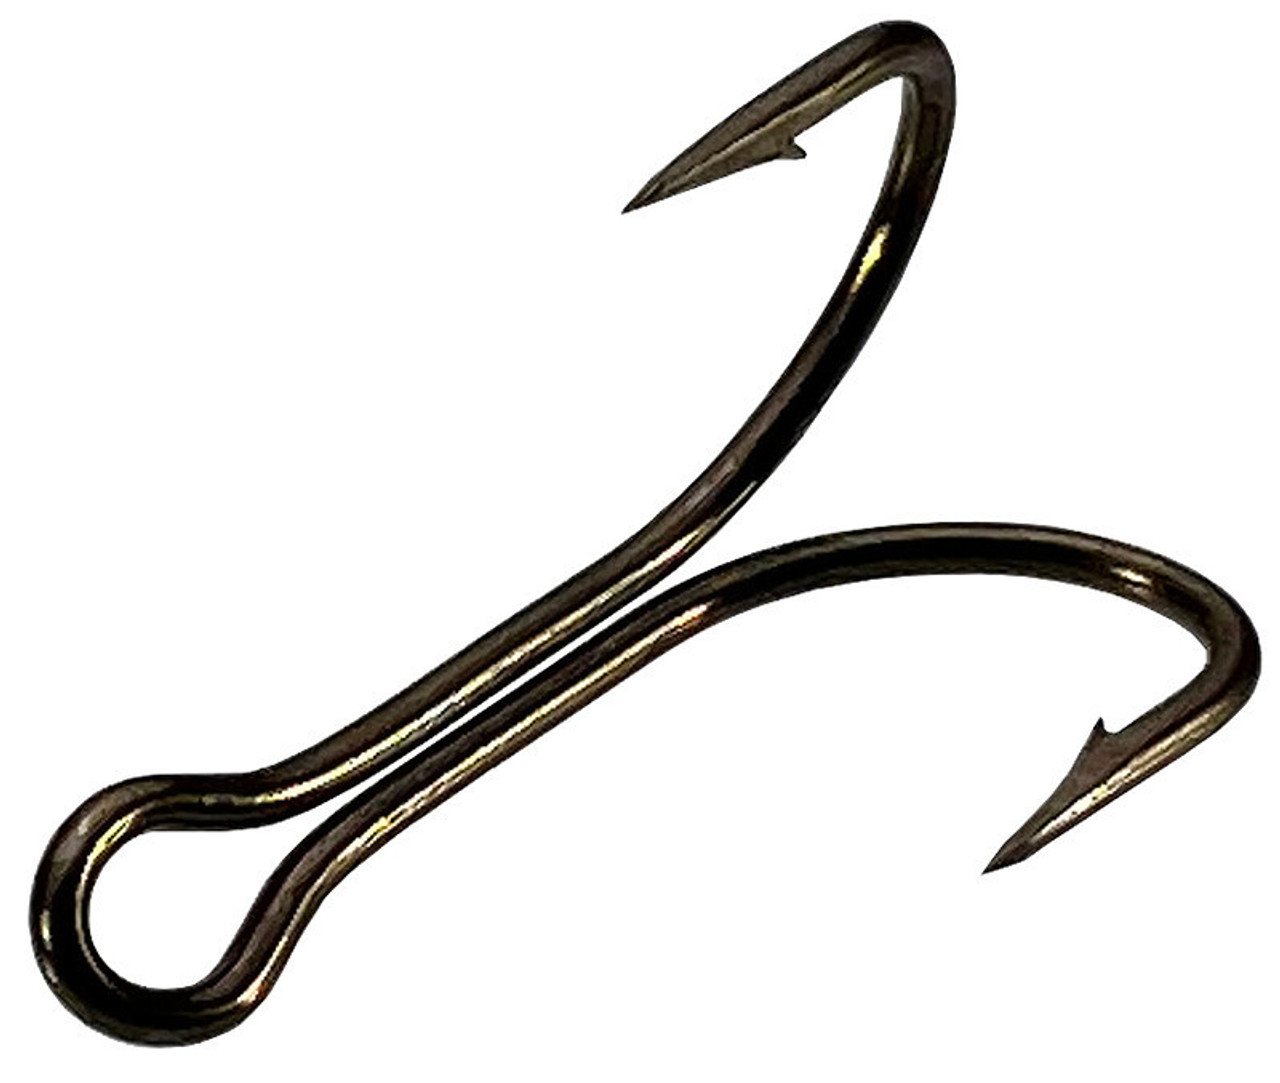 VMC 9908 BZ Double Hook - Barlow's Tackle